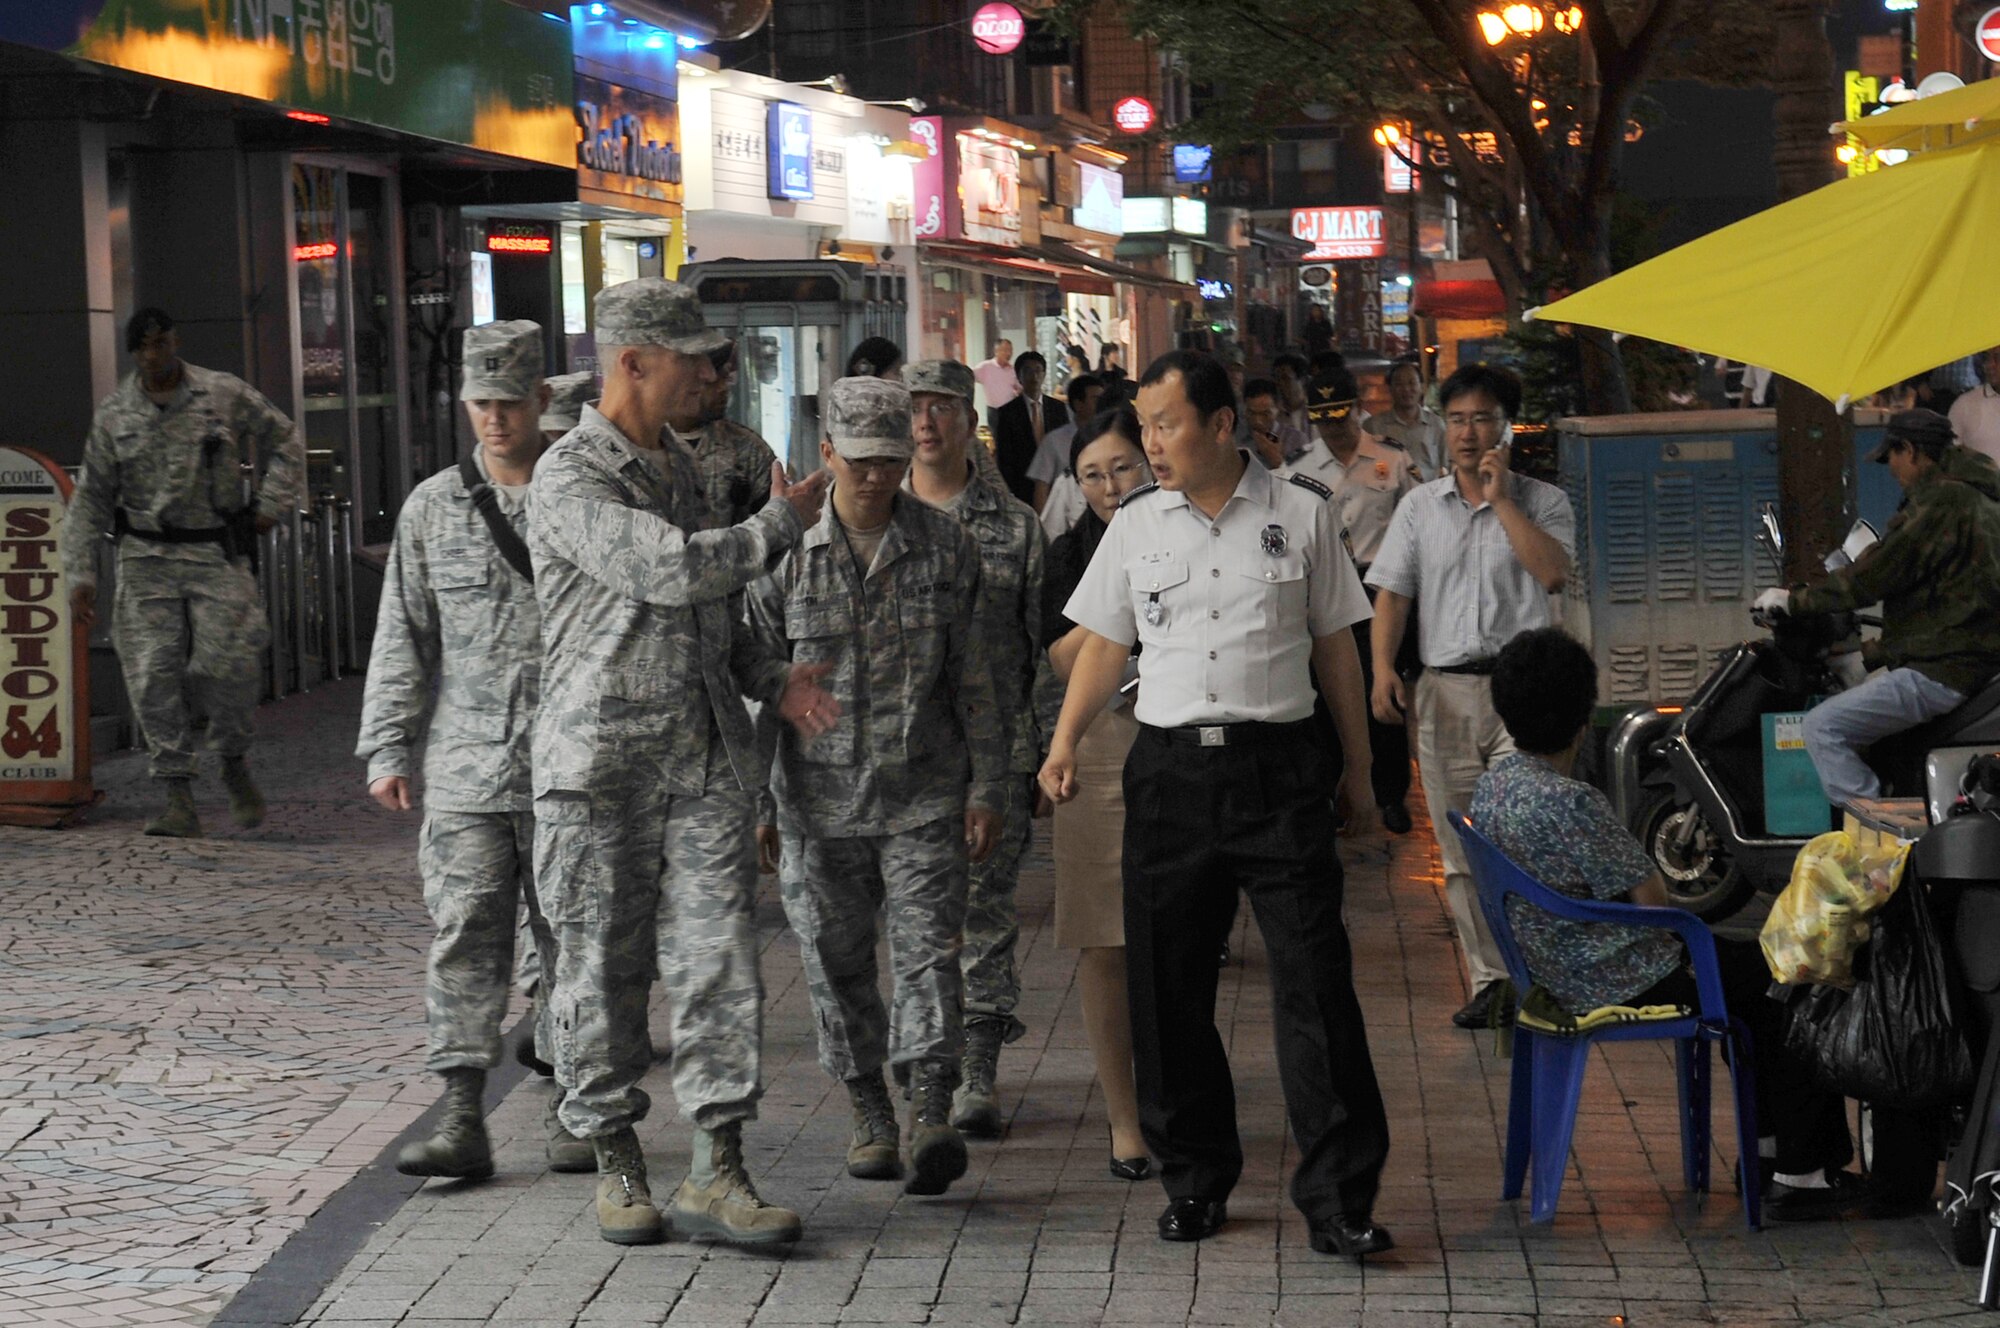 Col. Patrick McKenzie, 51st Fighter Wing commander, Mr. Sang Yung Pak, Chief of Pyeongtaek Police, lead a contingent of several city council members July 10, 2012, on a joint town patrol in the Songtan Entertainment District, just outside the gates of Osan Air Base, Republic of Korea. The patrol is part of an effort to strengthen the alliance between the ROK and United States, and it highlights the importance of joint partnership in law enforcement and force protection. The commanders also discussed joint town patrols, Korean Nation Police assistance with parking restrictions, and off-limits establishments to U.S. Forces Korea personnel. (U.S. Air Force photo/Staff Sgt. Craig Cisek)